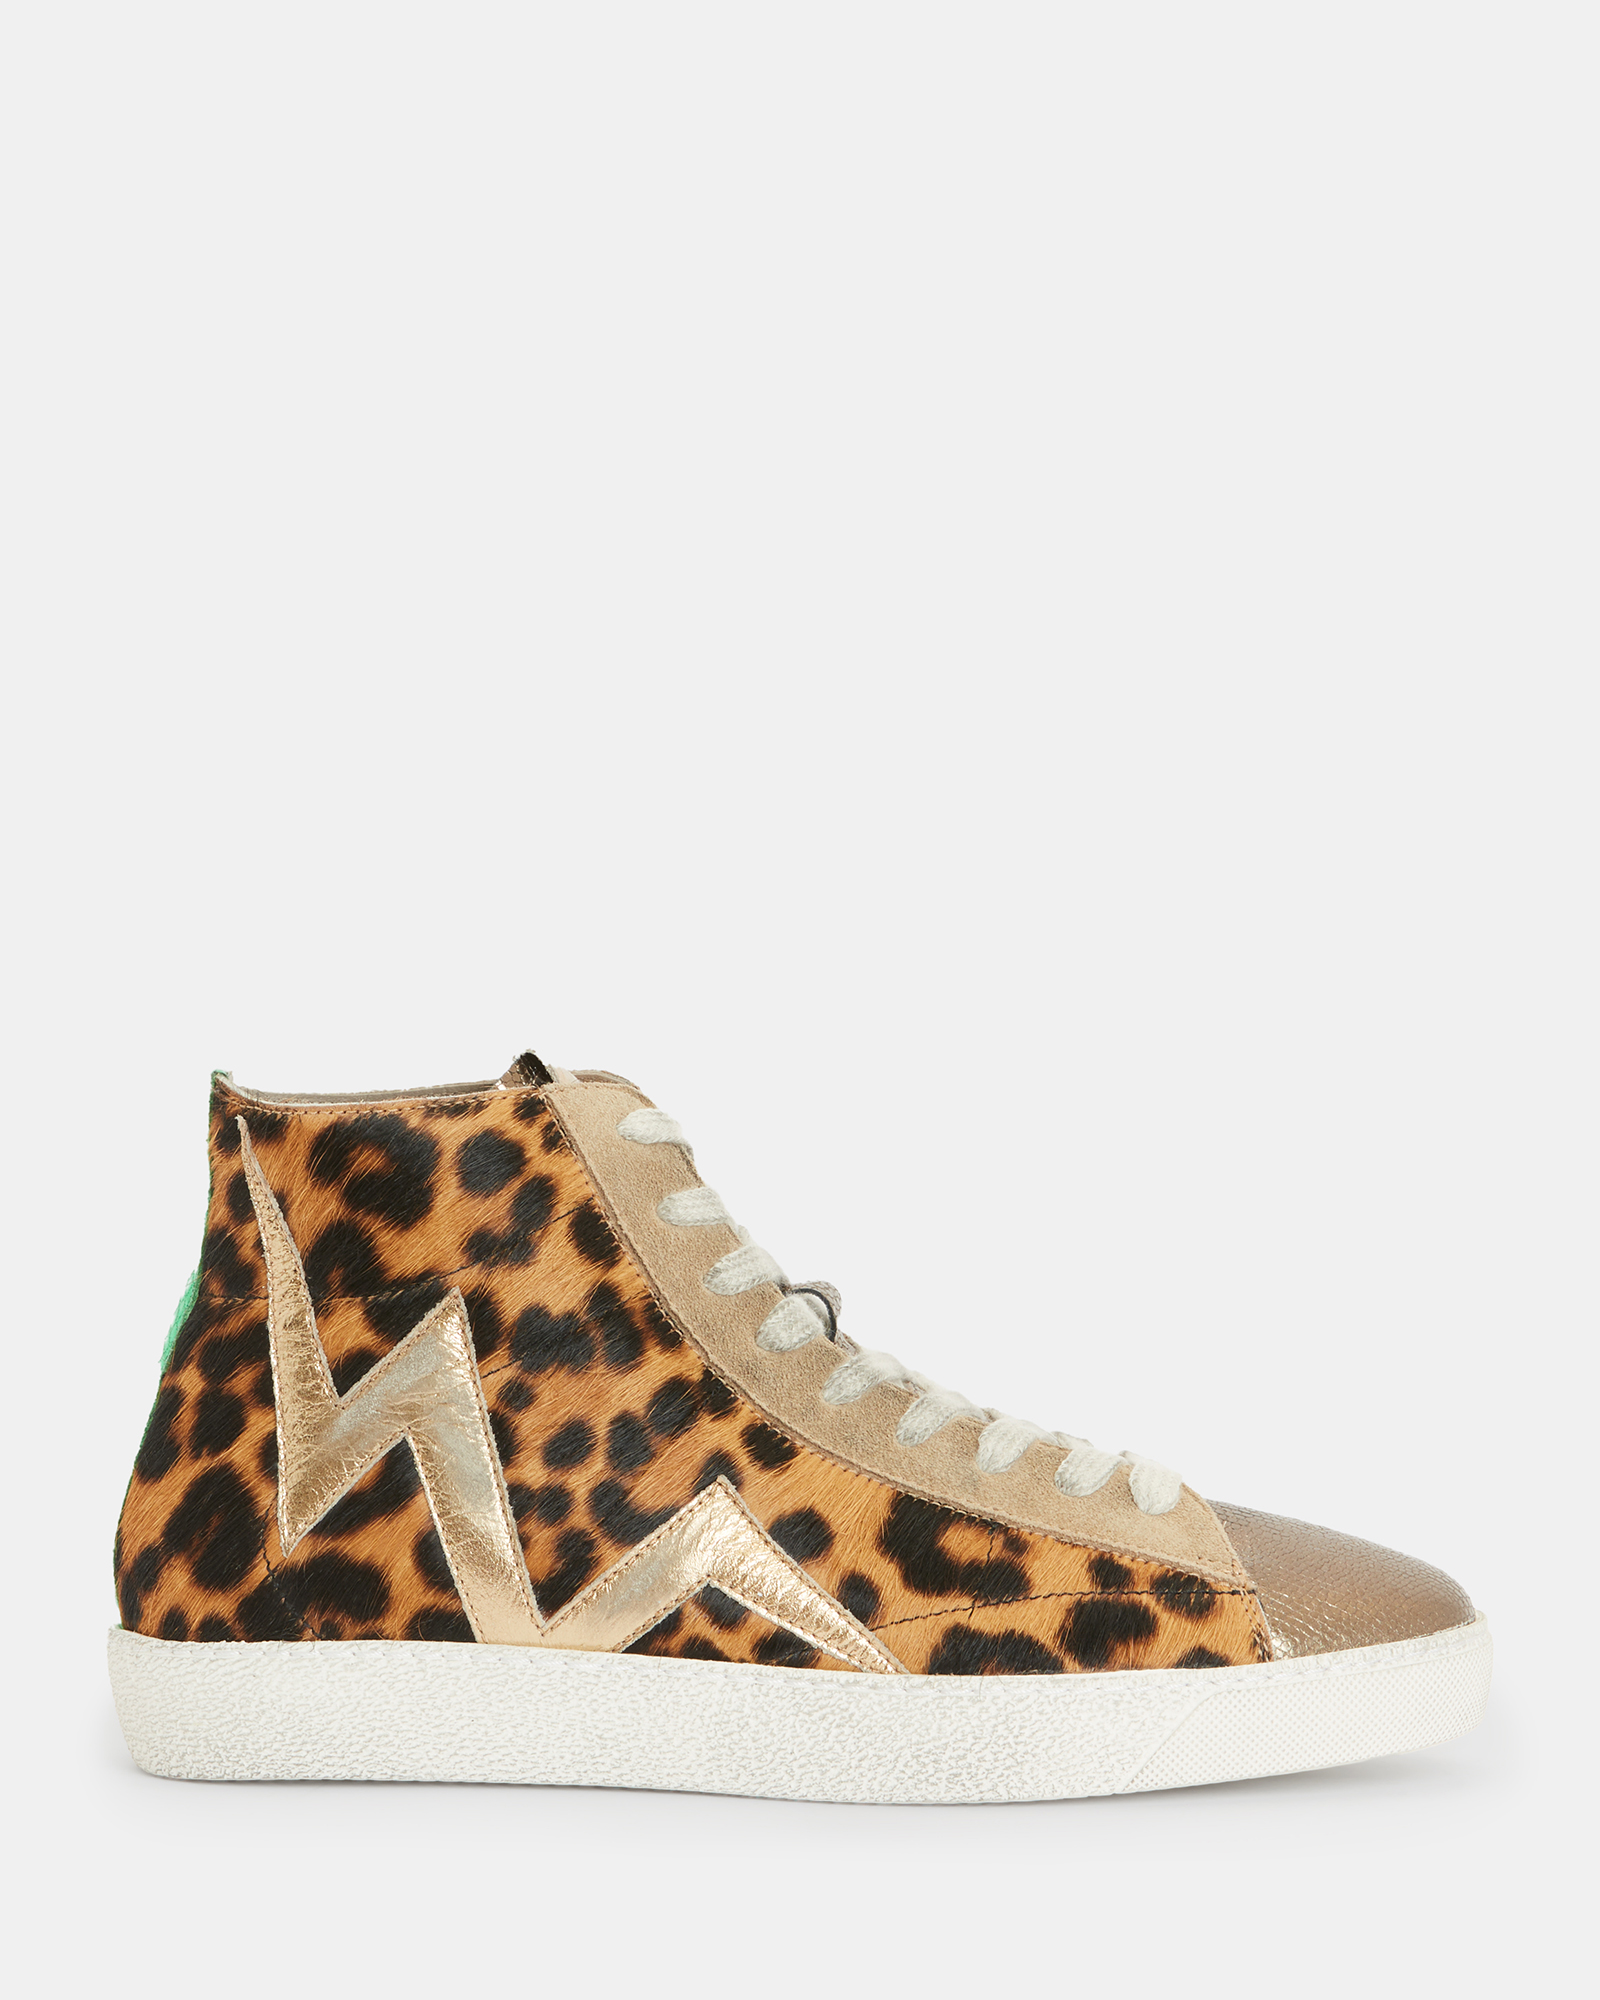 Tundy Bolt Leopard Print Trainers ANIMAL BROWN | ALLSAINTS